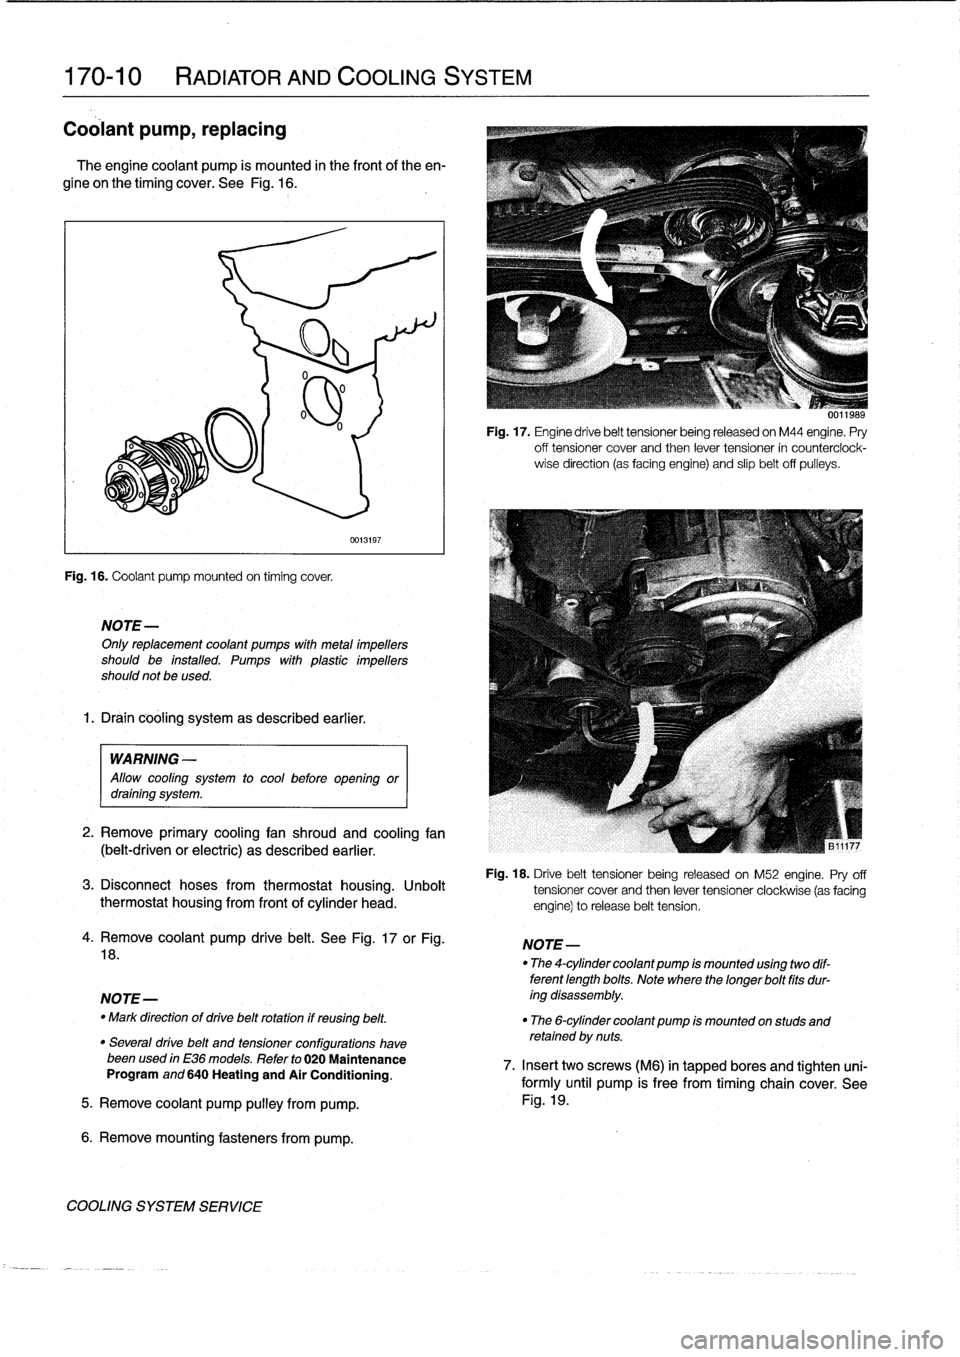 BMW 323i 1993 E36 Workshop Manual 
170-10

	

RADIATOR
AND
COOLING
SYSTEM

Coolant
pump,
replacing

The
engine
coolant
pump
is
mounted
in
the
frontof
the
en-

gine
on
the
timing
cover
.
See
Fig
.
16
.

Fig
.
16
.
Coolant
pump
mounted
